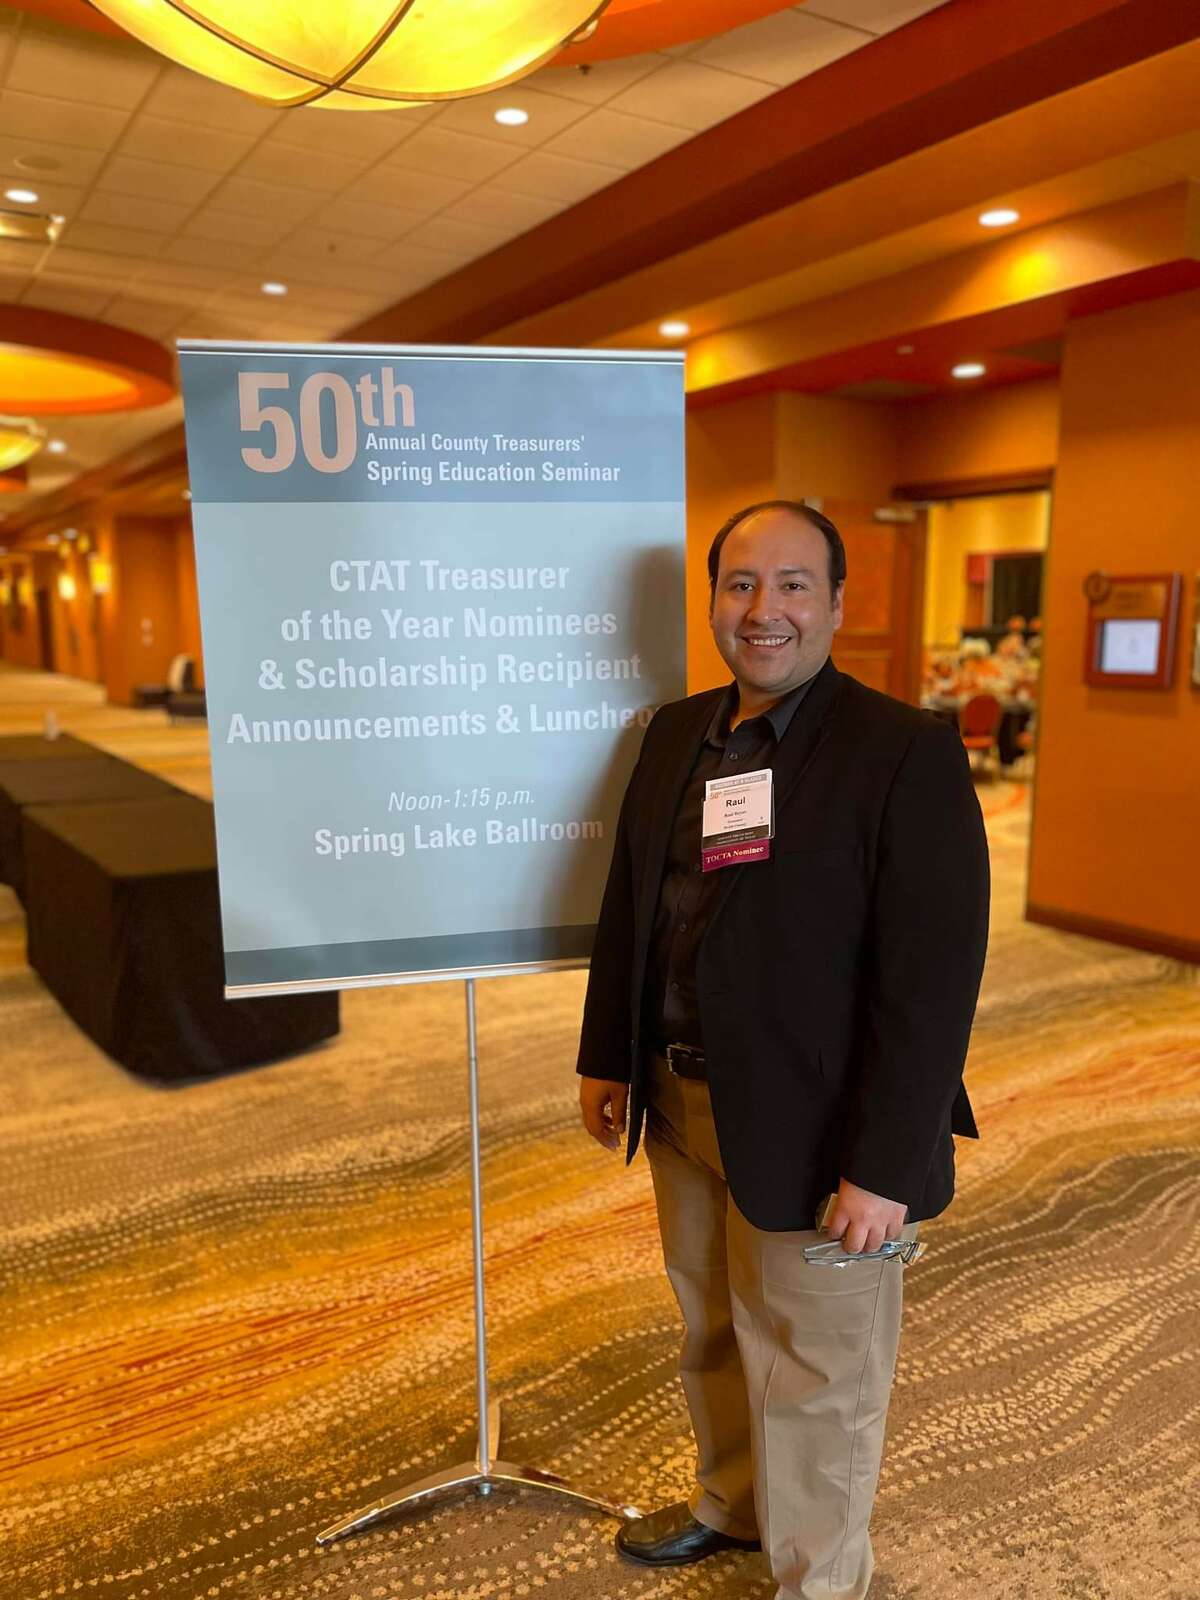 Raul Reyes, Webb County Treasurer, has been been selected as one of the four finalists by the County Treasurers’ Association of Texas for the 2022 Outstanding County Treasurer of the Year Award. The winner of the award will be announced in September in Waco, Texas.